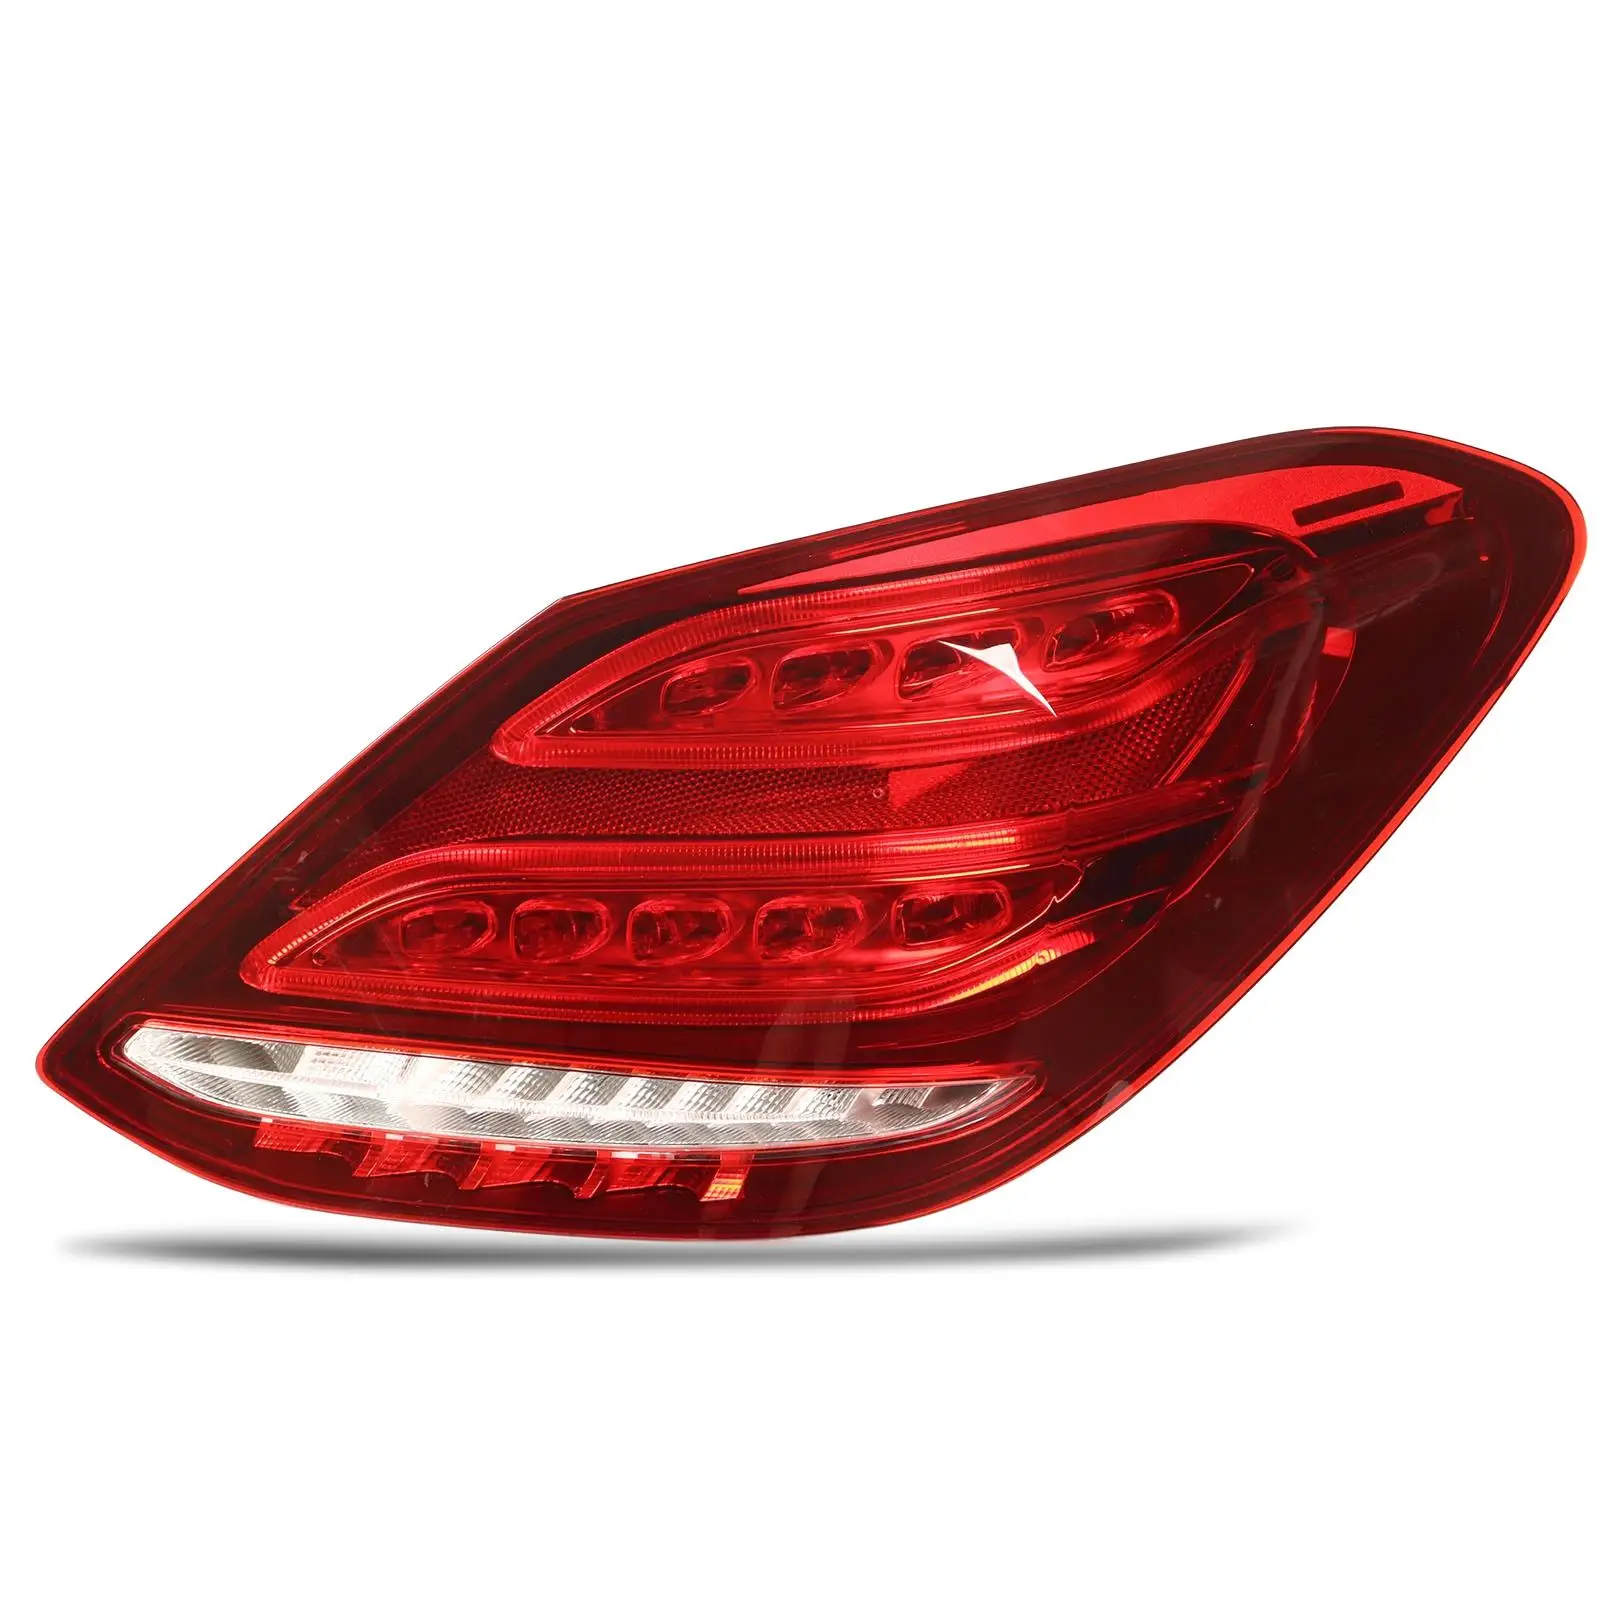 

LED Tail Lights Rear Lamp for Mercedes Benz C-Class W205 Sedan 2015-2018 A2059060457